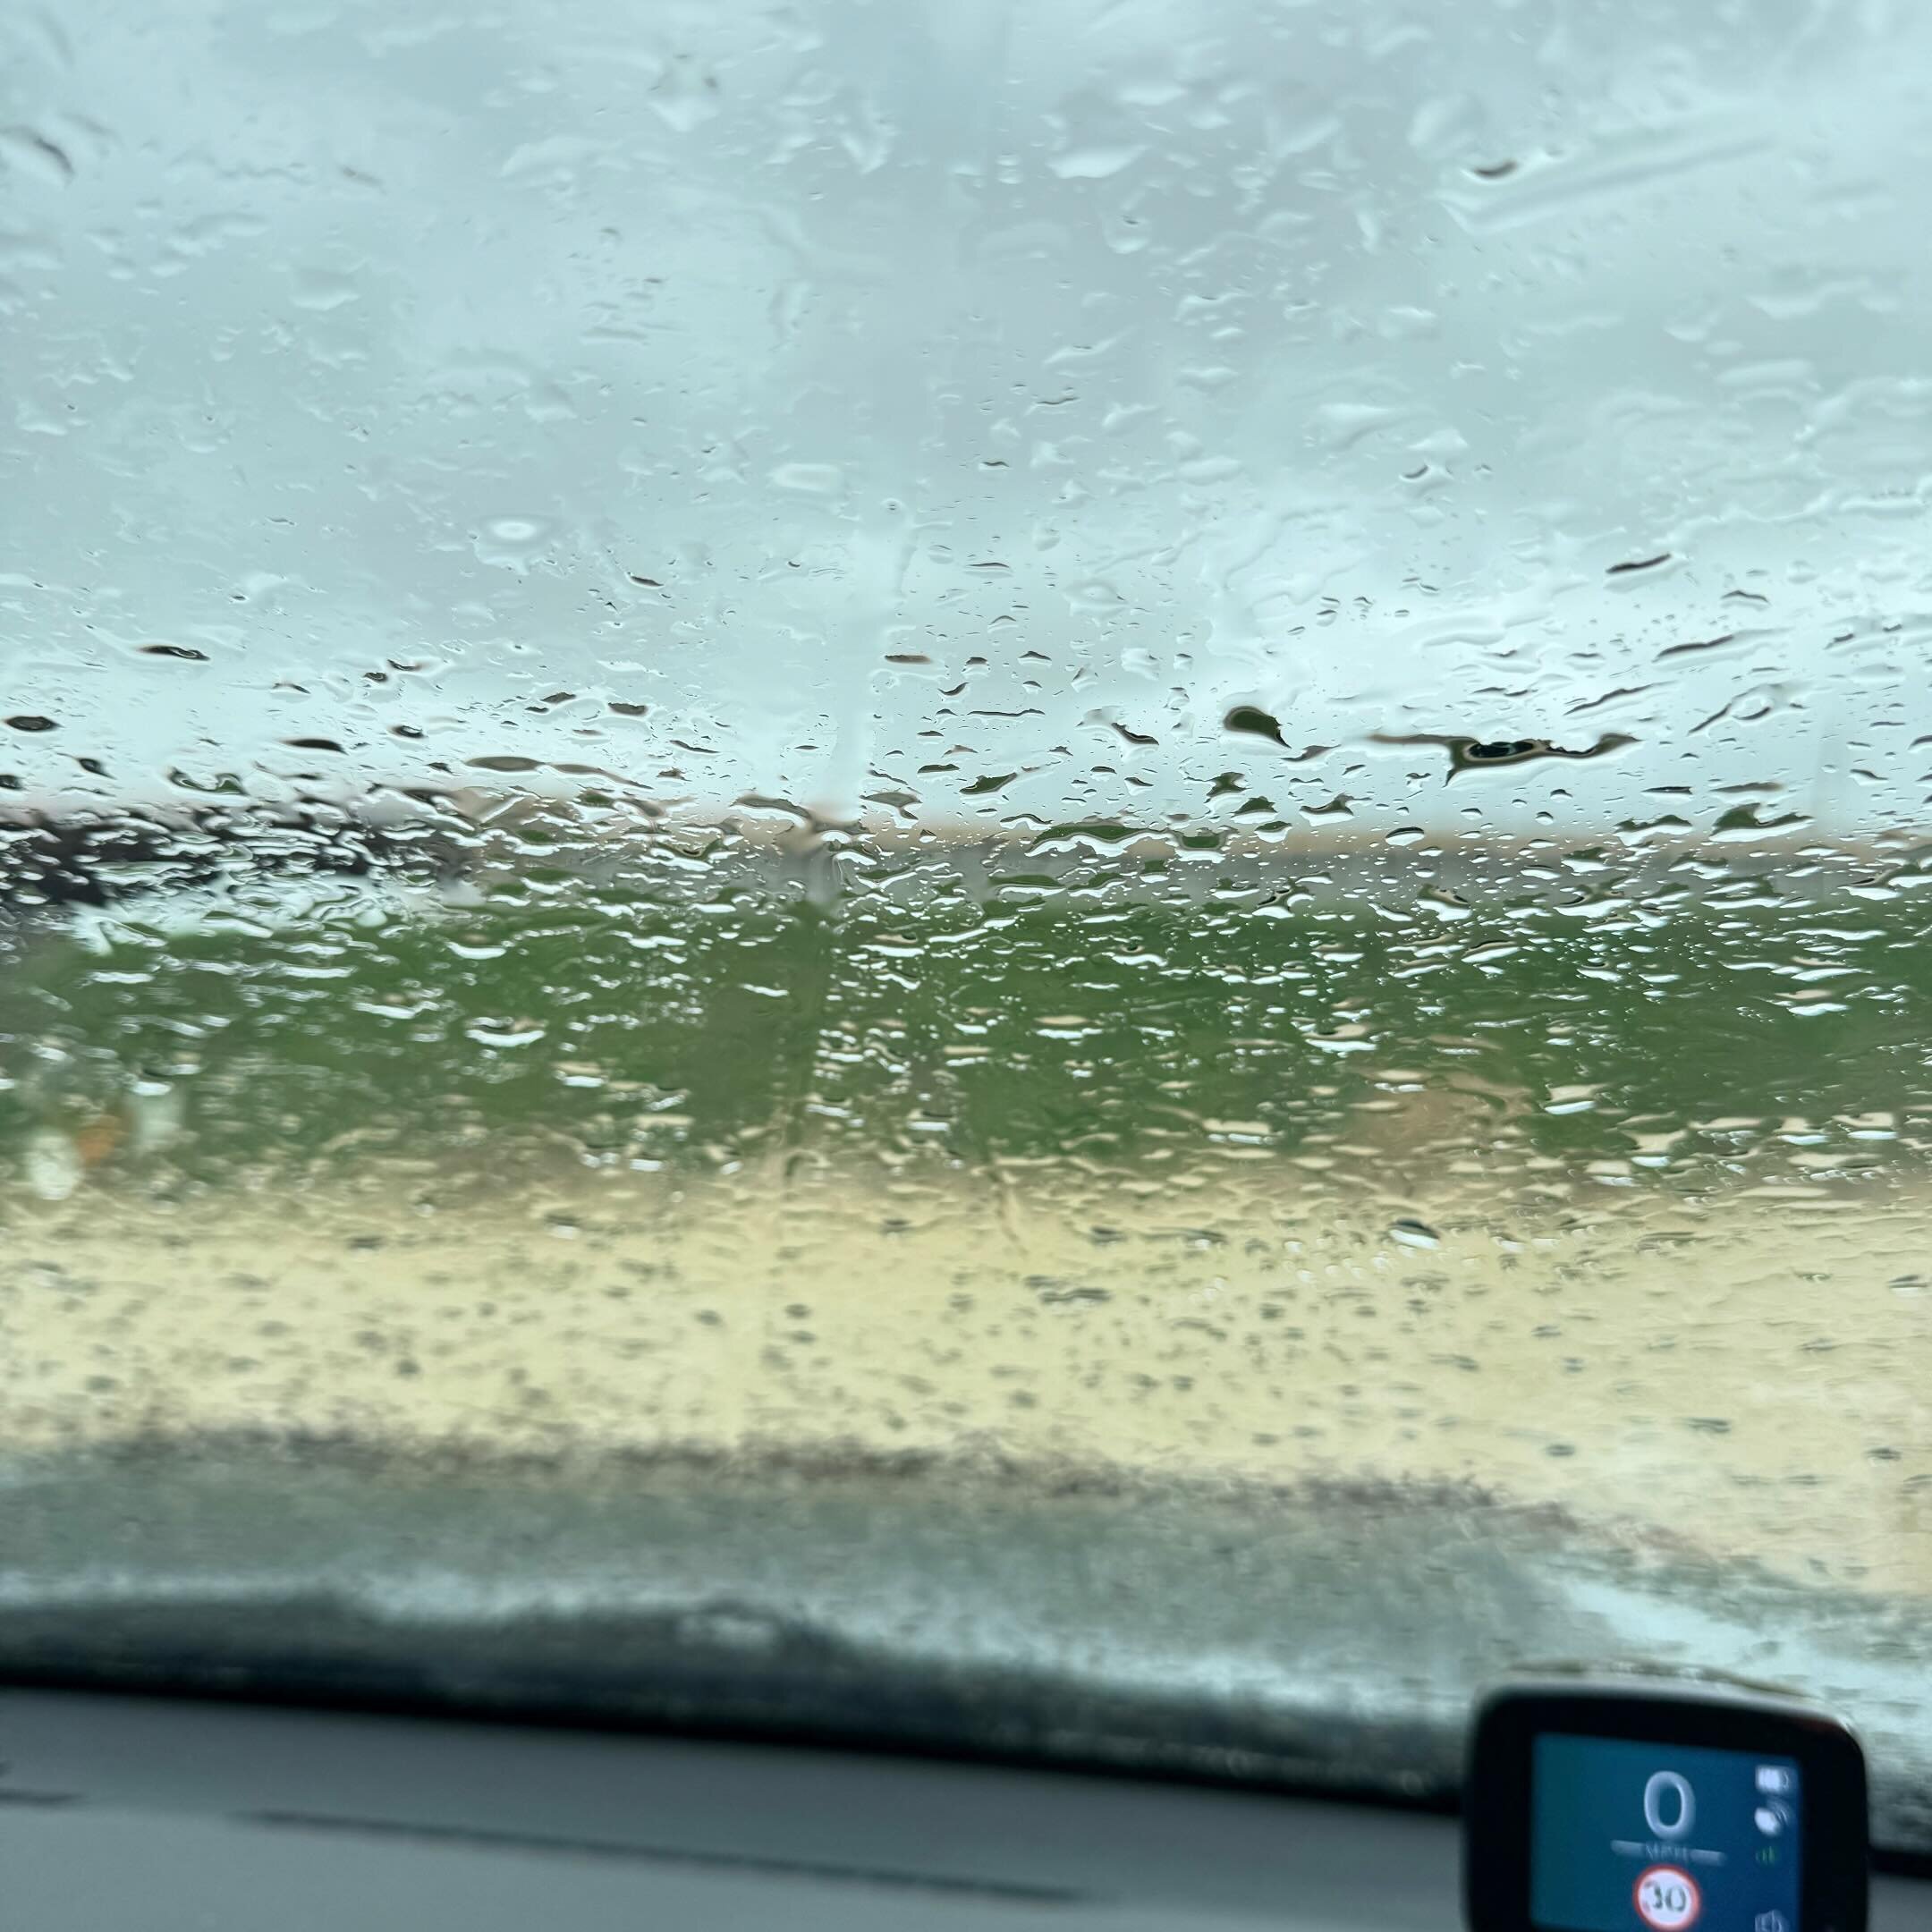 Not ideal weather for today's shoot🌧️!!
Good job we've a bean to cup coffee machine in the truck ☕️